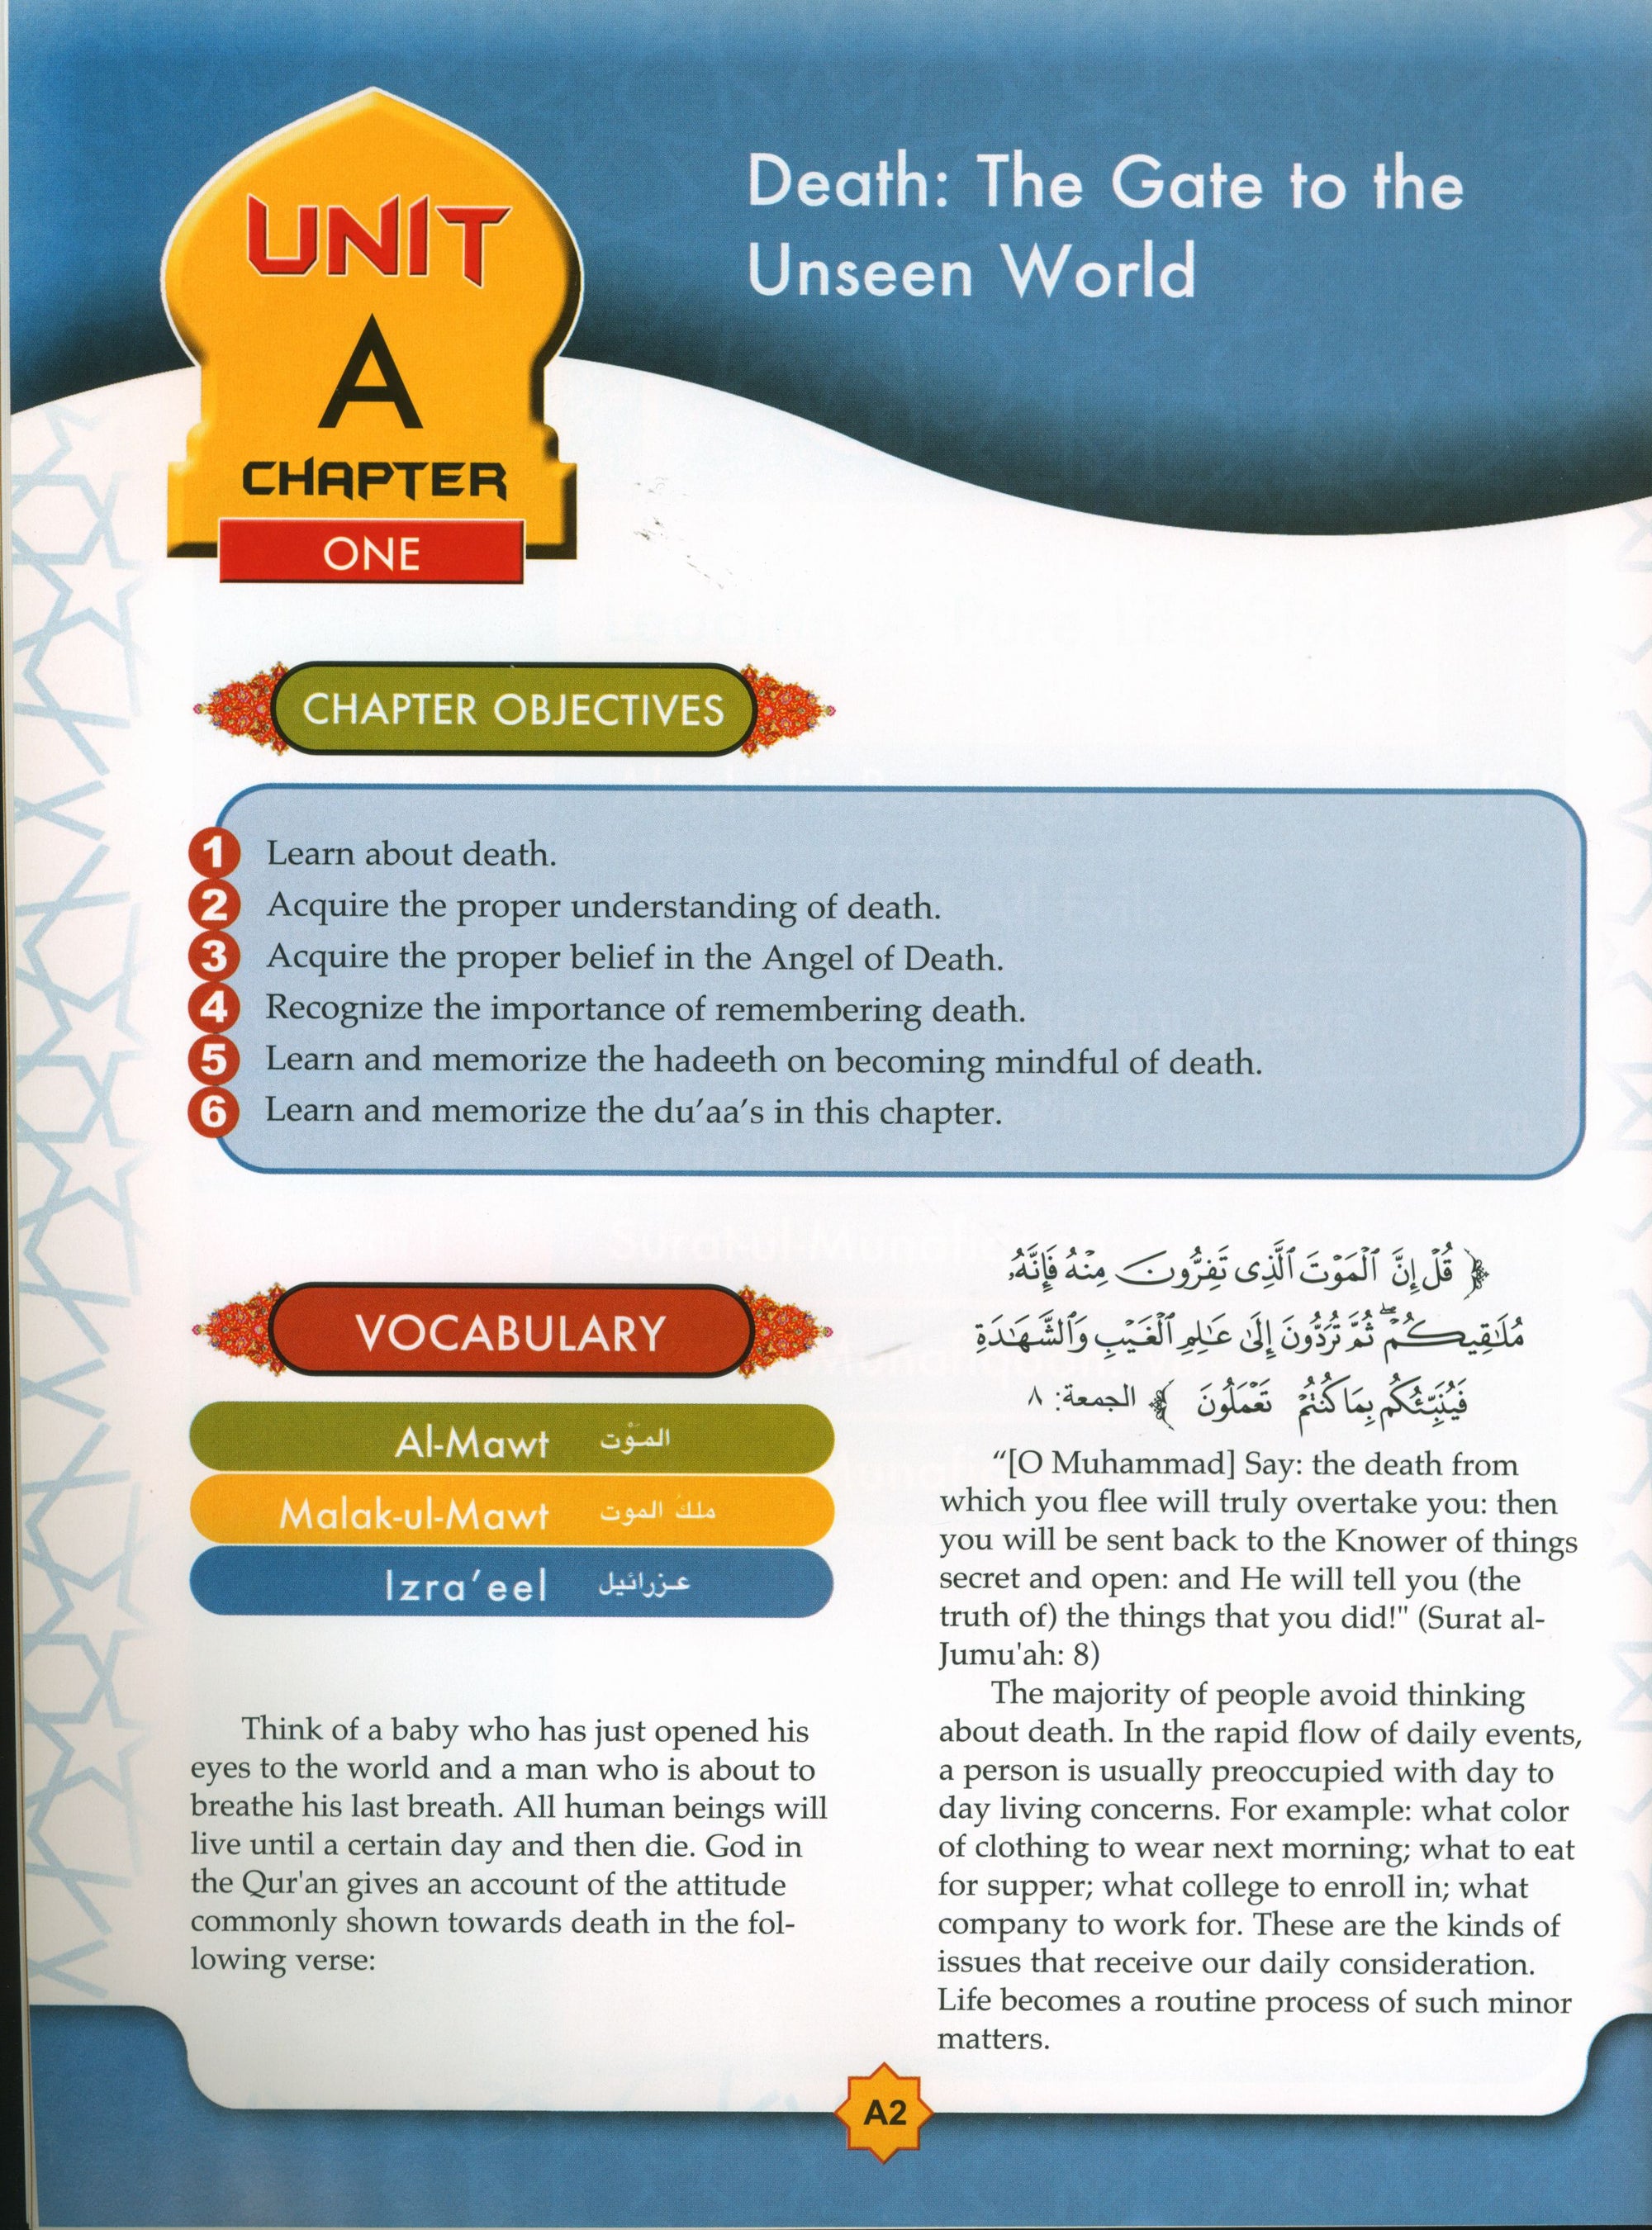 Learning Islam Weekend Edition Textbook Level 5 (10th Grade)